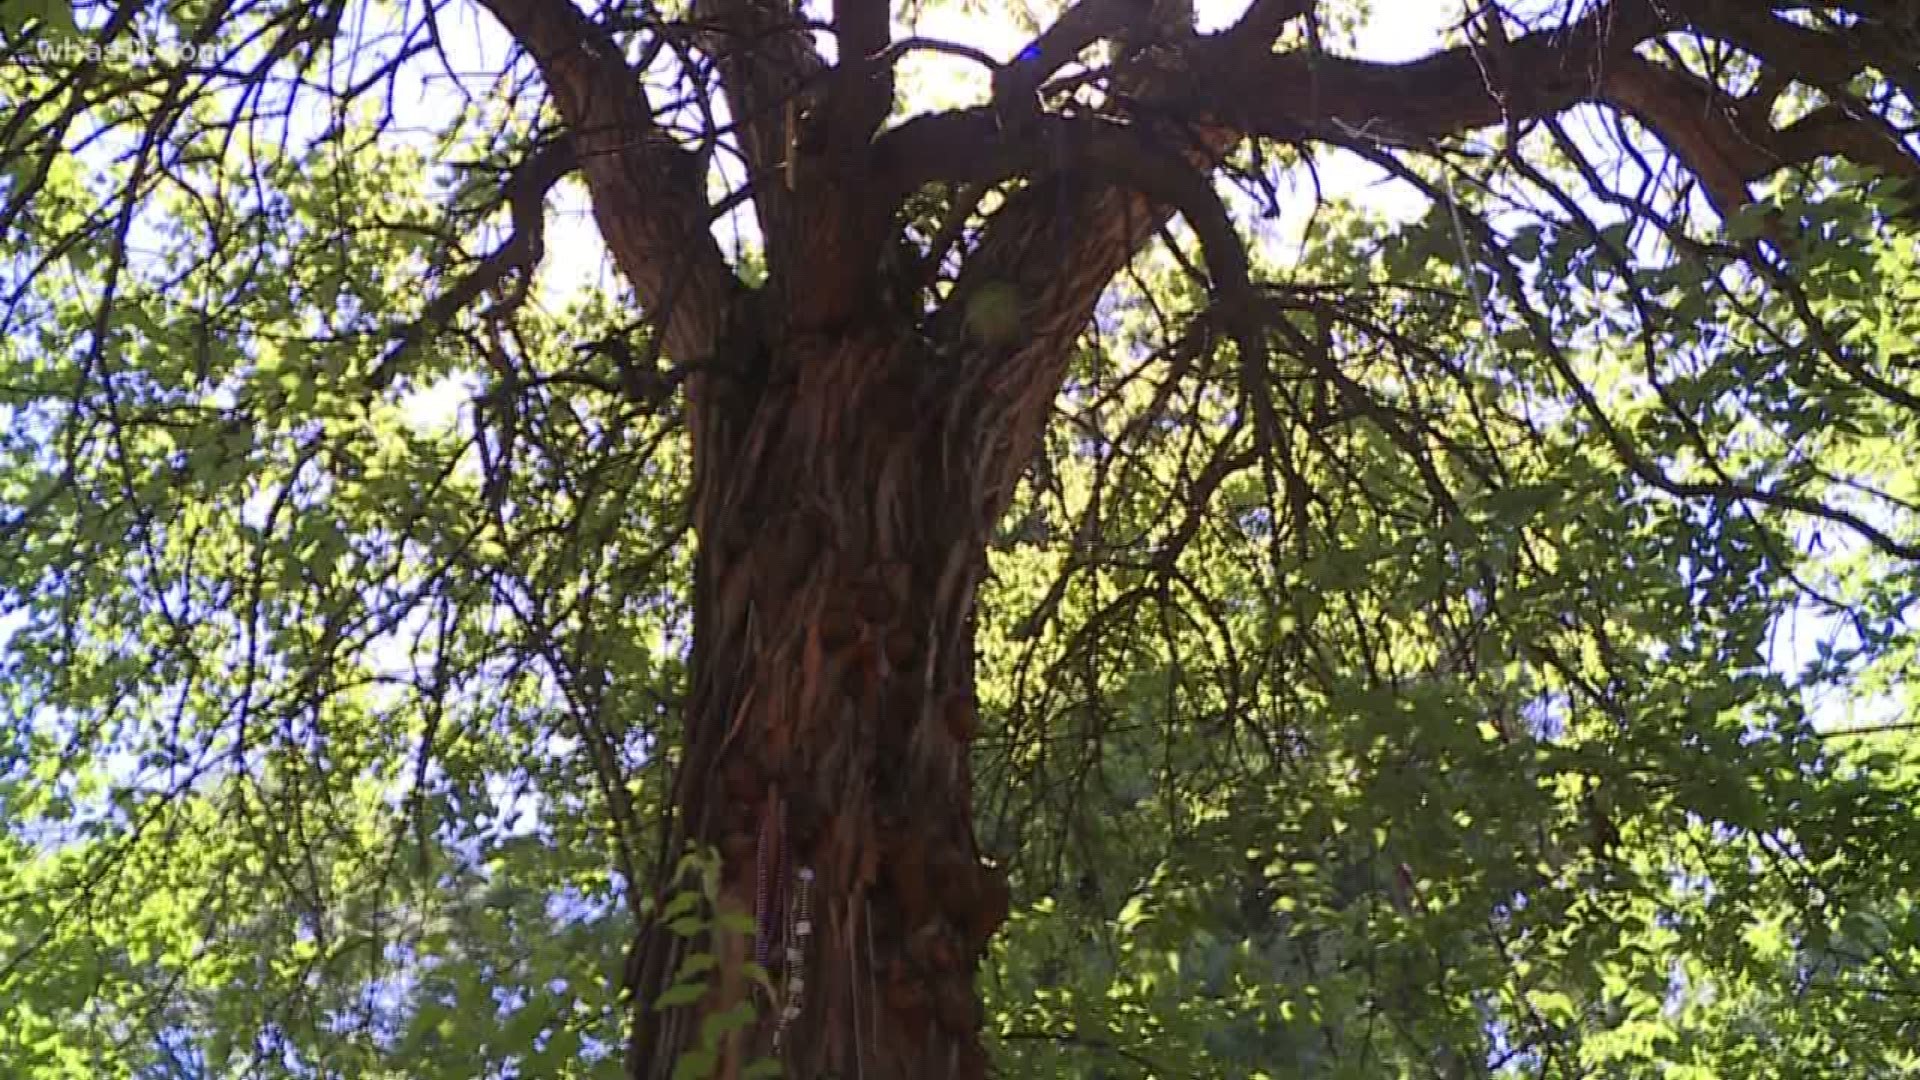 The witches tree in Louisville 